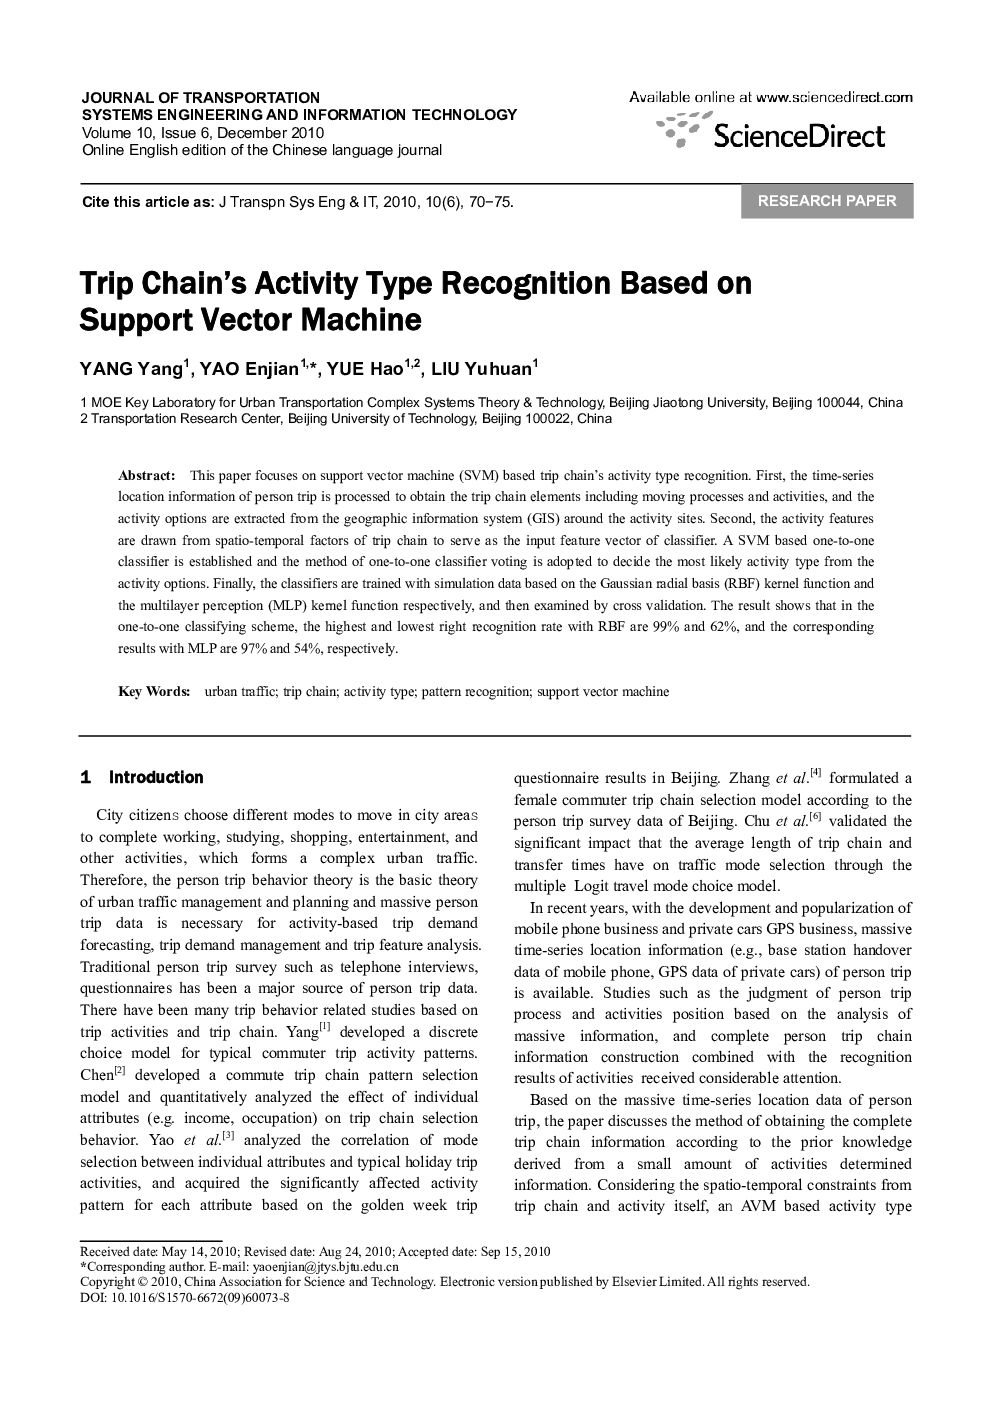 Trip Chain's Activity Type Recognition Based on Support Vector Machine